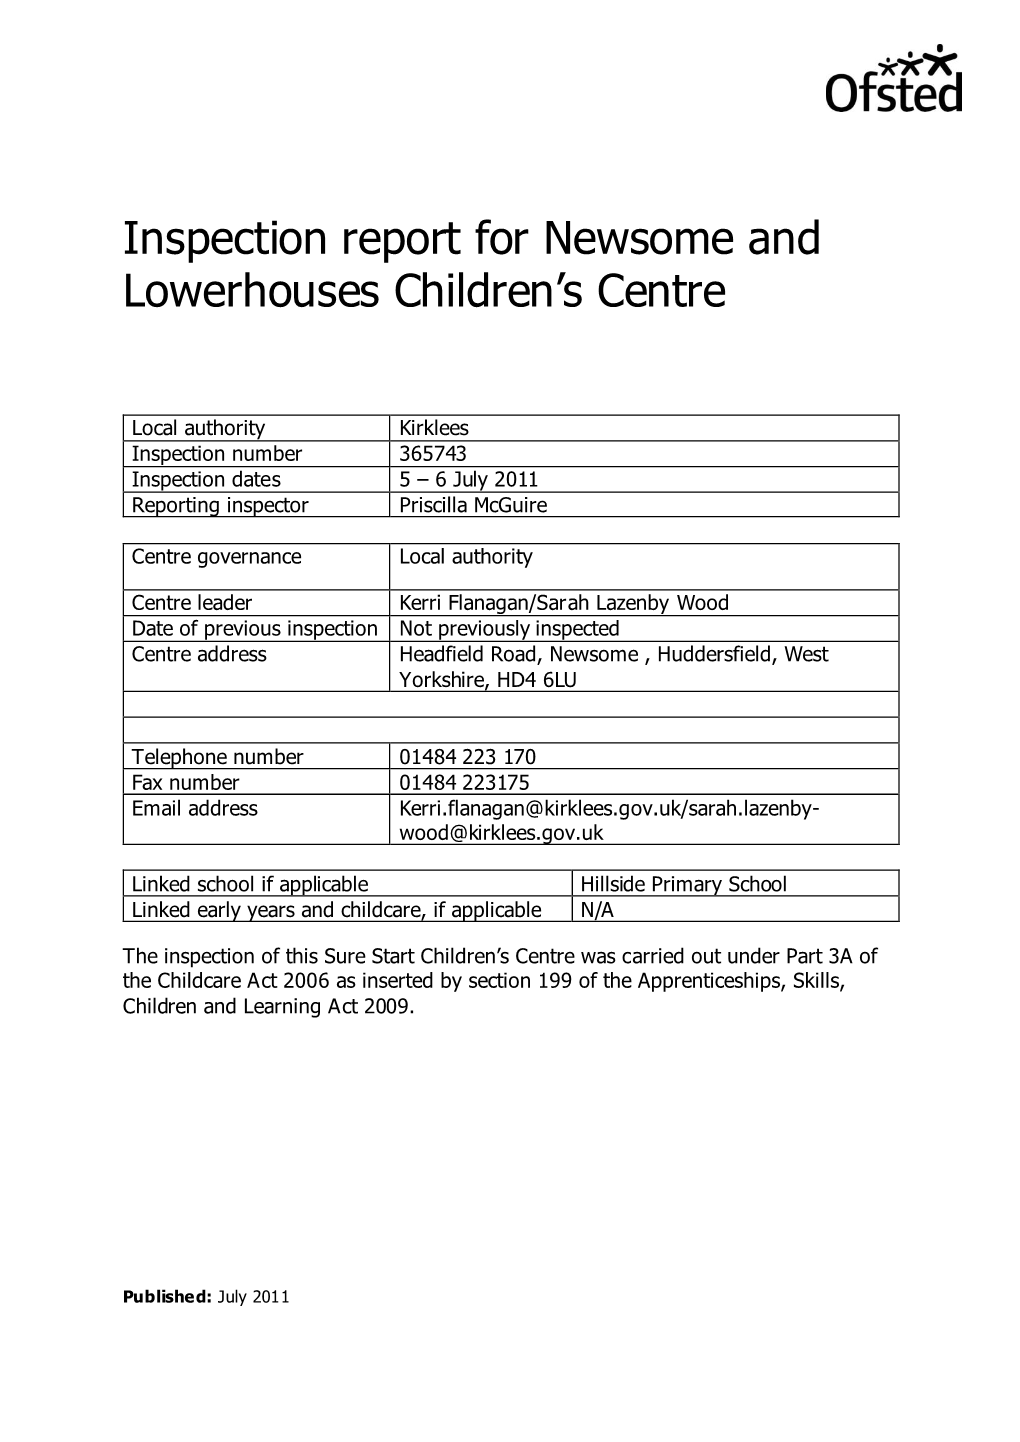 Inspection Report for Newsome and Lowerhouses Children's Centre